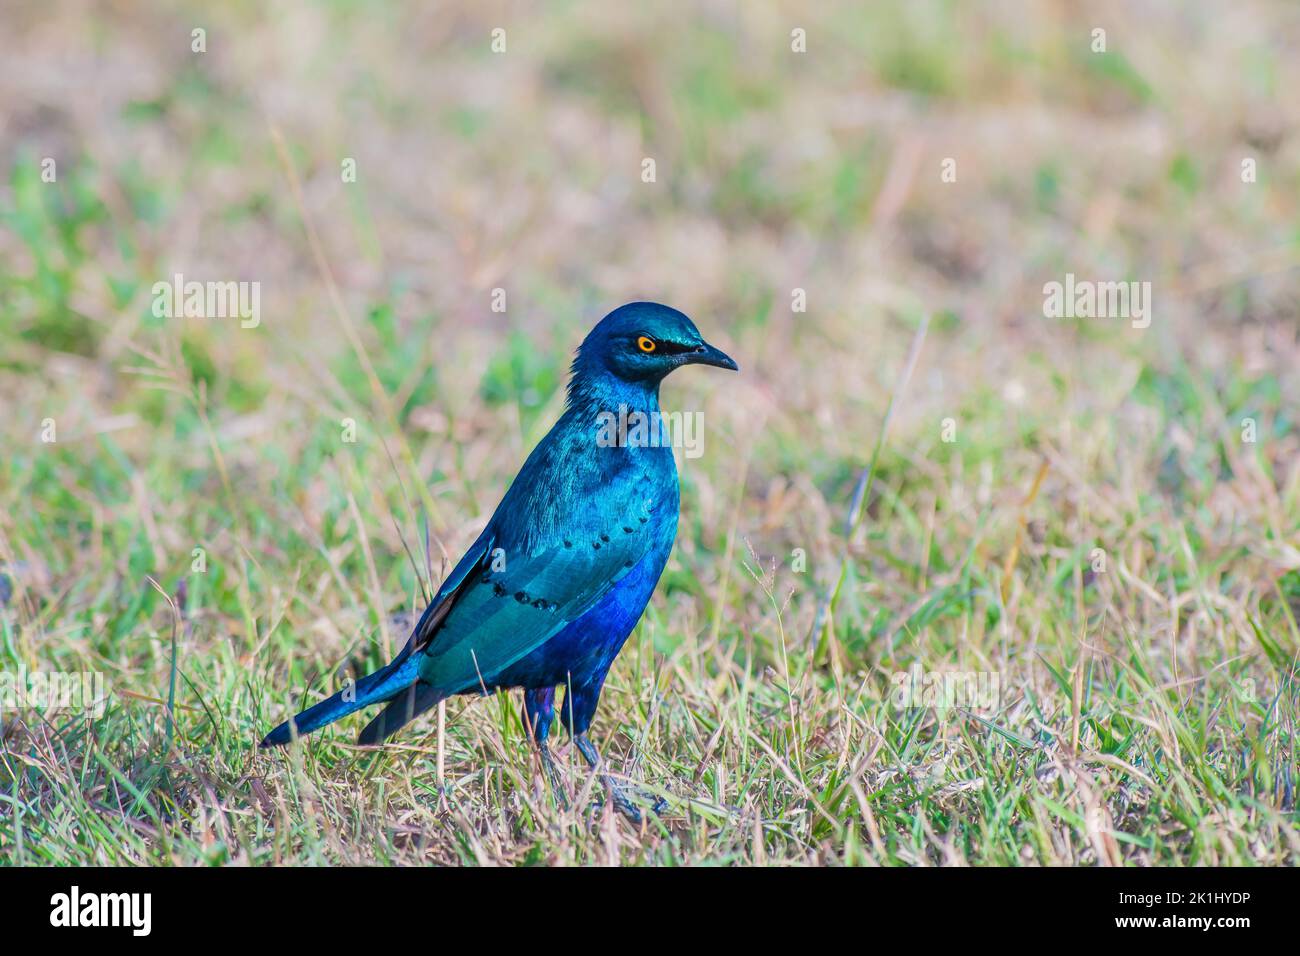 Greater Blue Eared Starling perched on the ground Stock Photo